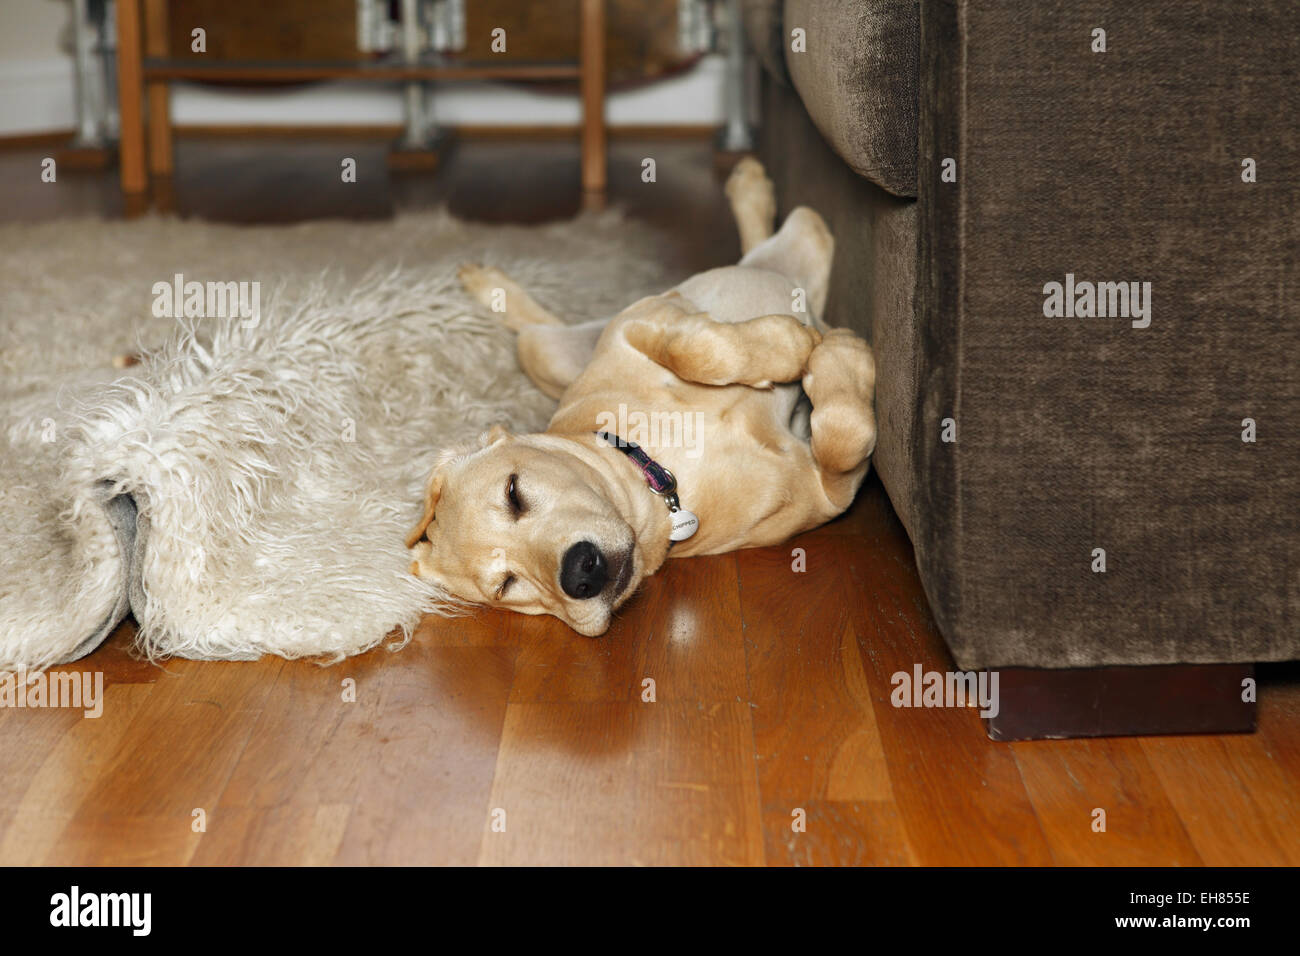 Yellow Labrador Retriever puppy aged 8 months sleeping in living room next to sofa Stock Photo